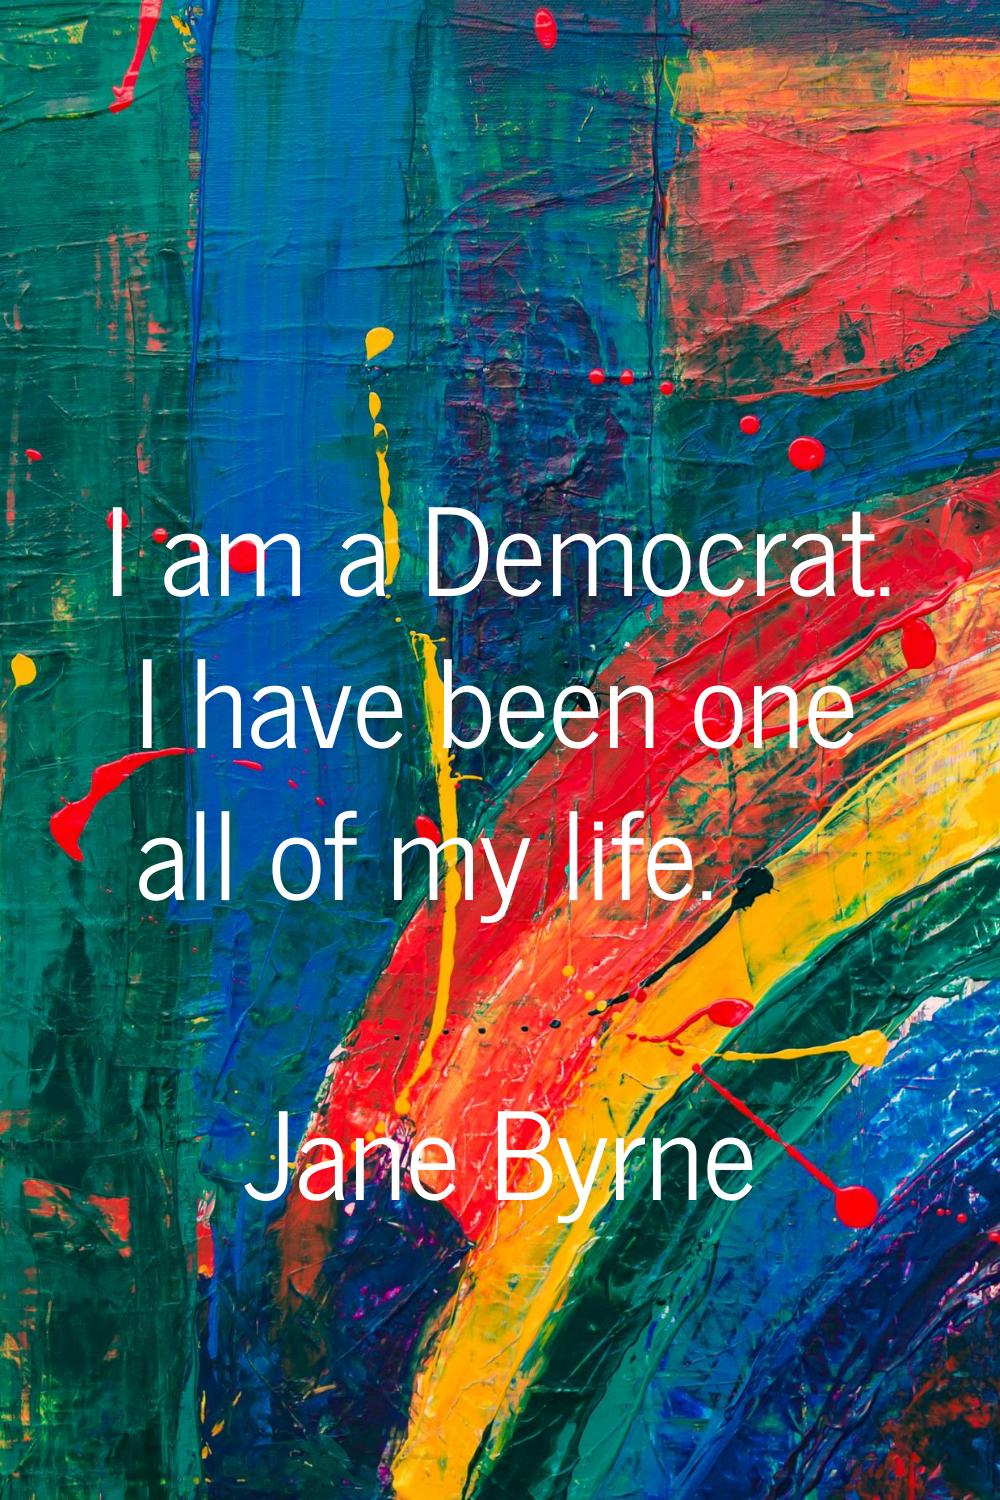 I am a Democrat. I have been one all of my life.